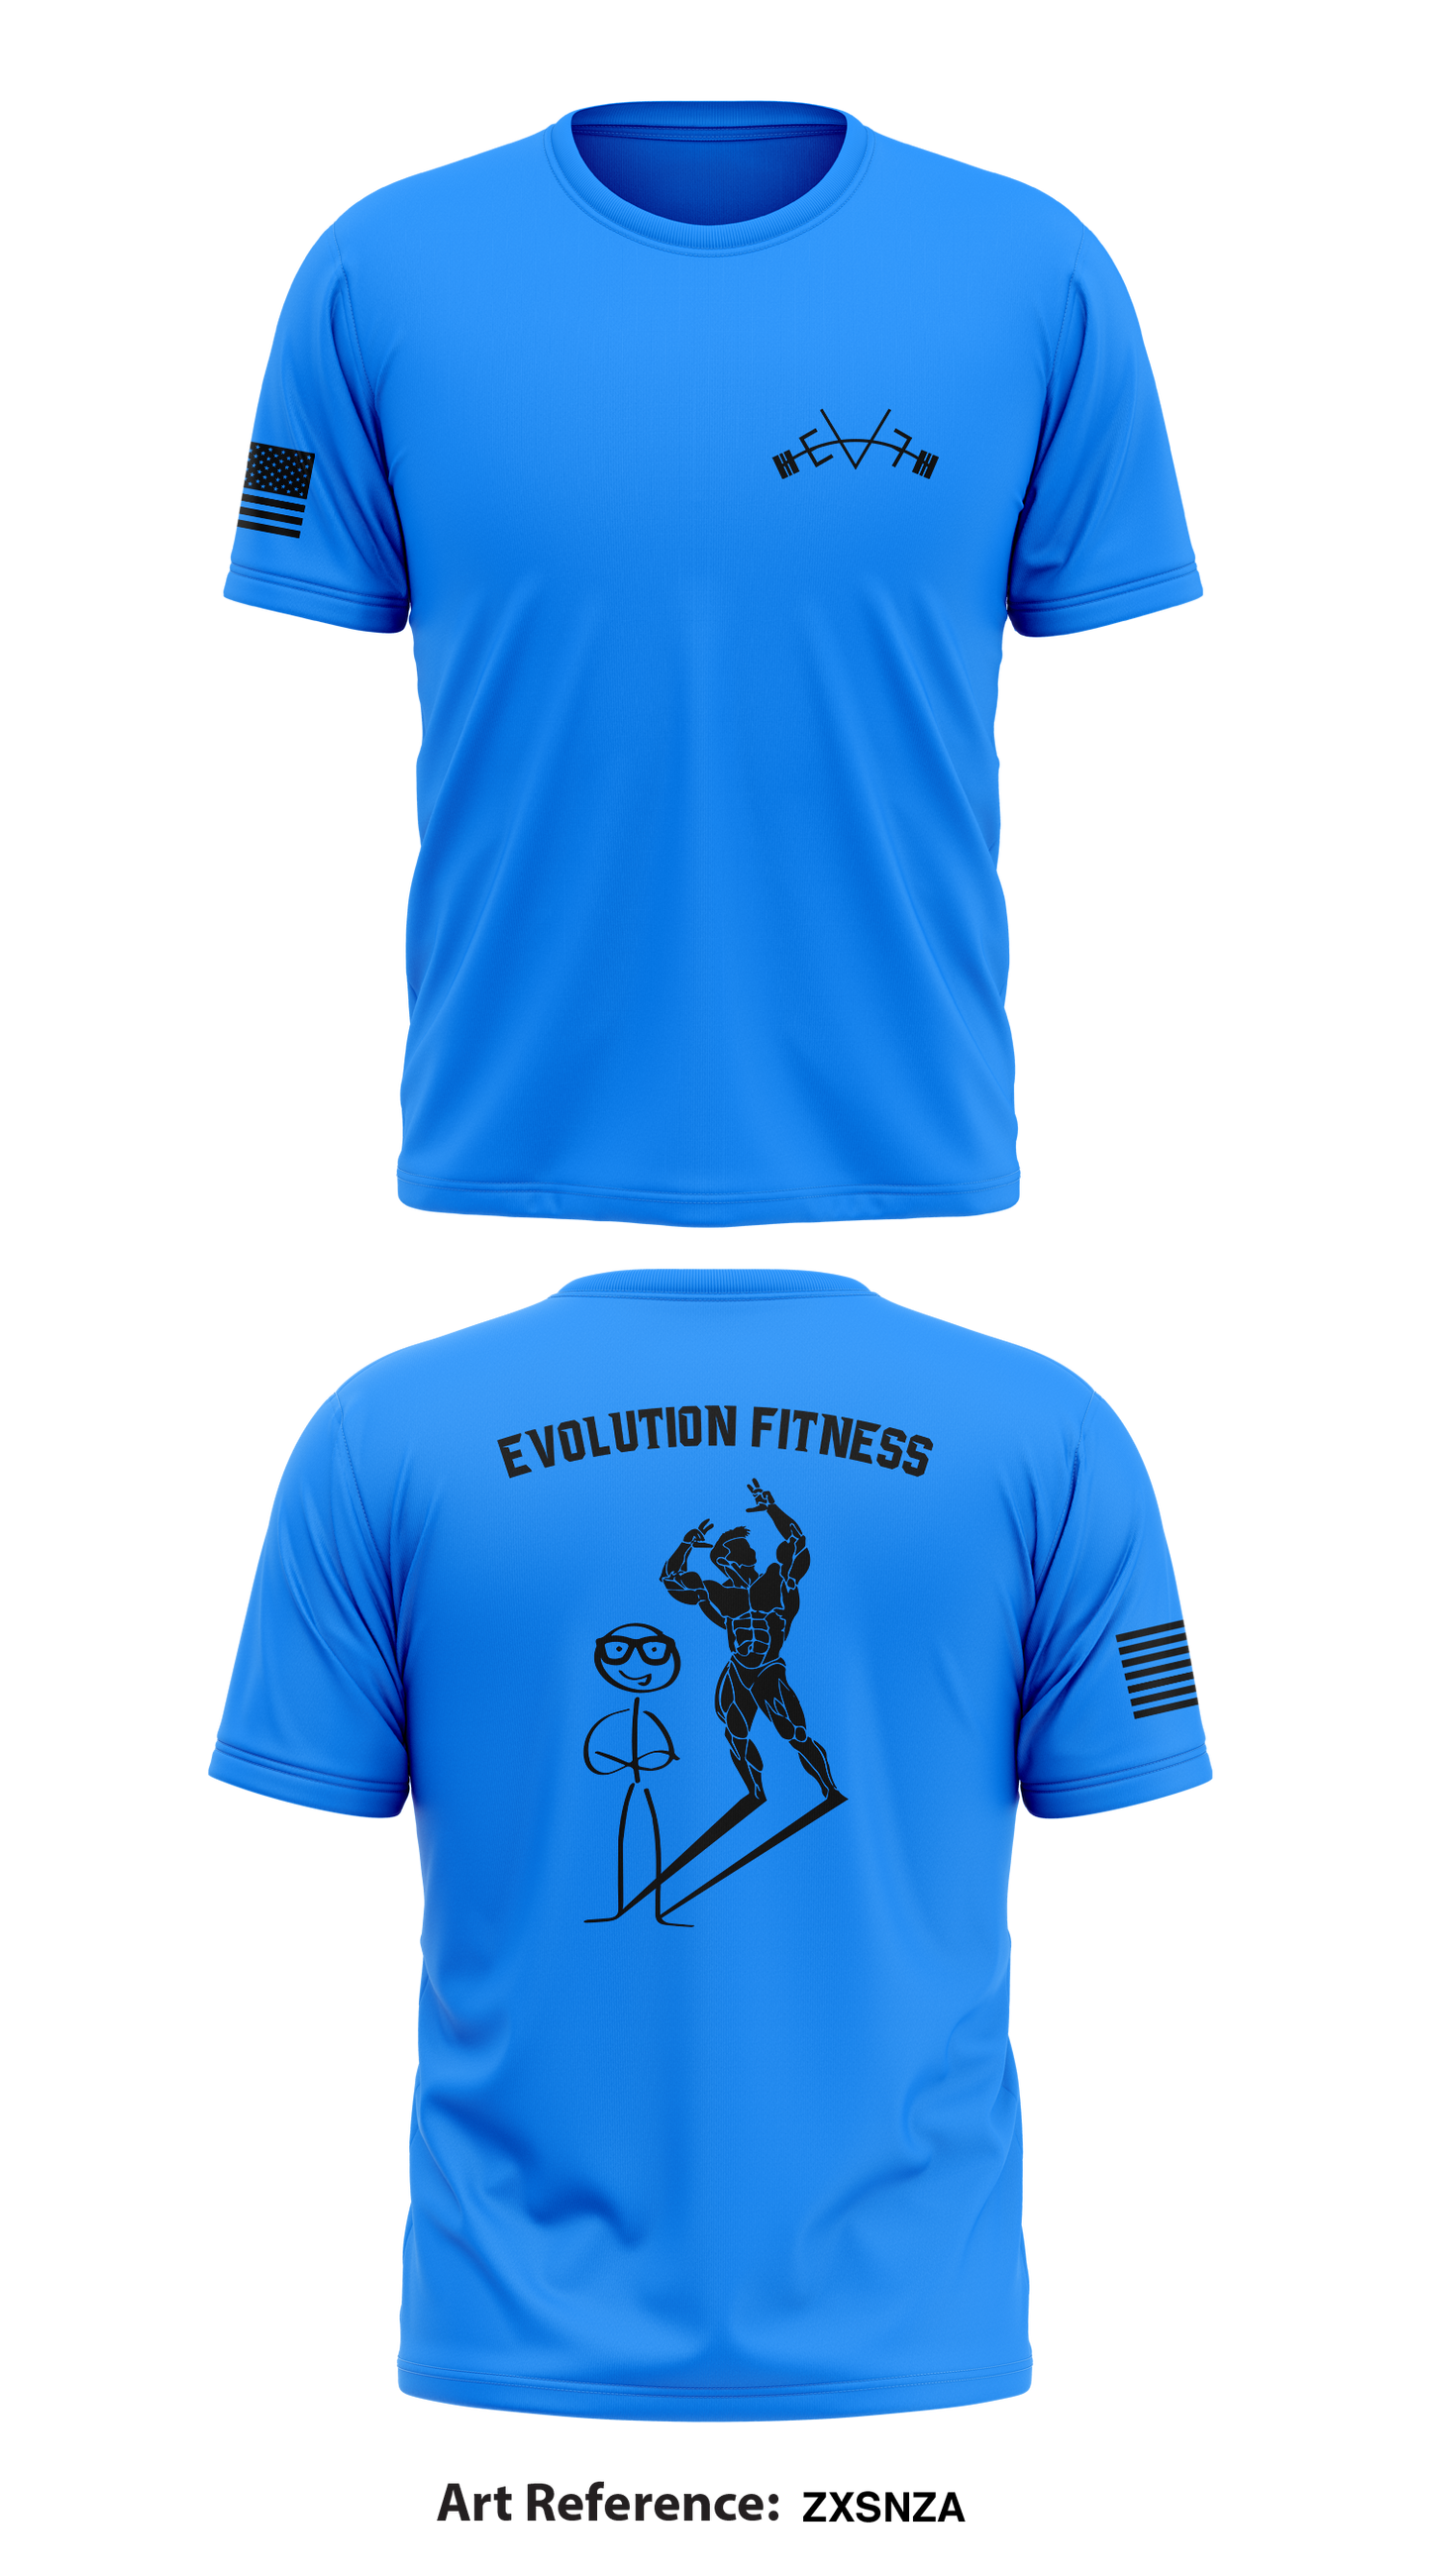 Evolution Fitness Store 1 Core Men's SS Performance Tee - zXsnza